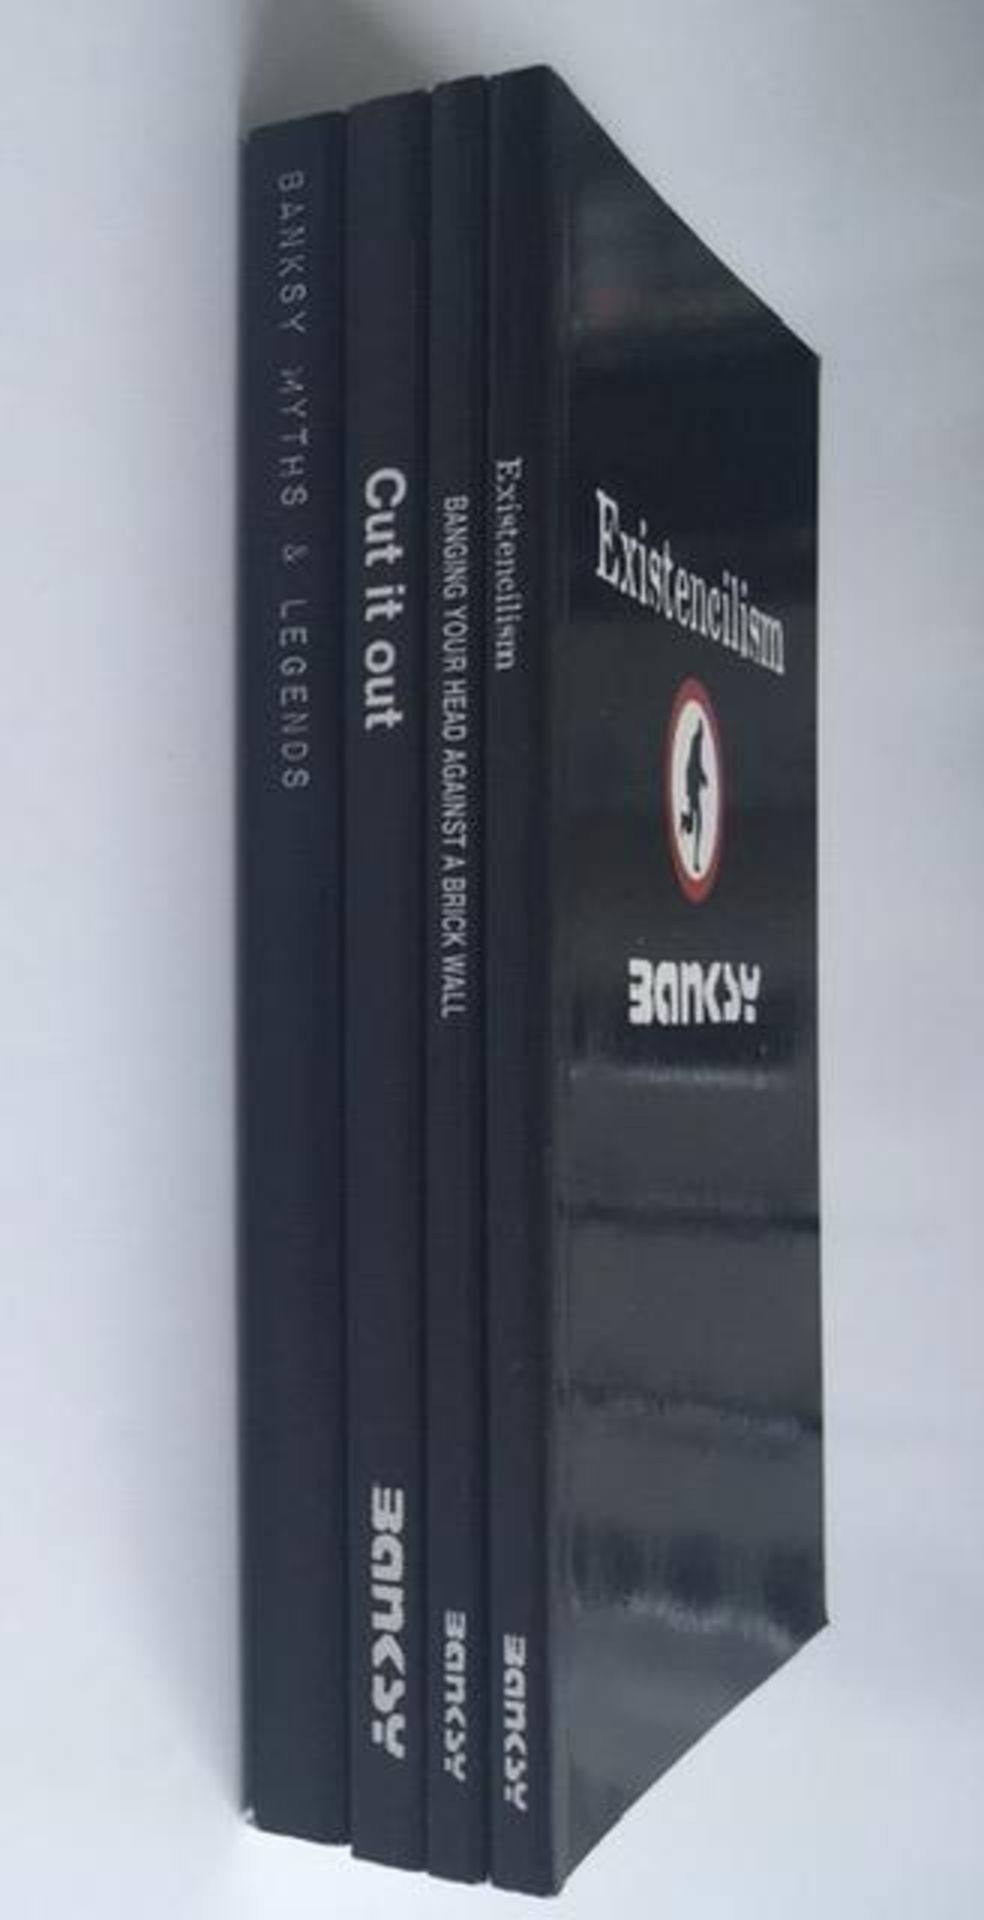 BANKSY Self-published books, Banging Your Head Against a Brick Wall, Existencilism, Cut it Out &m... - Image 2 of 8